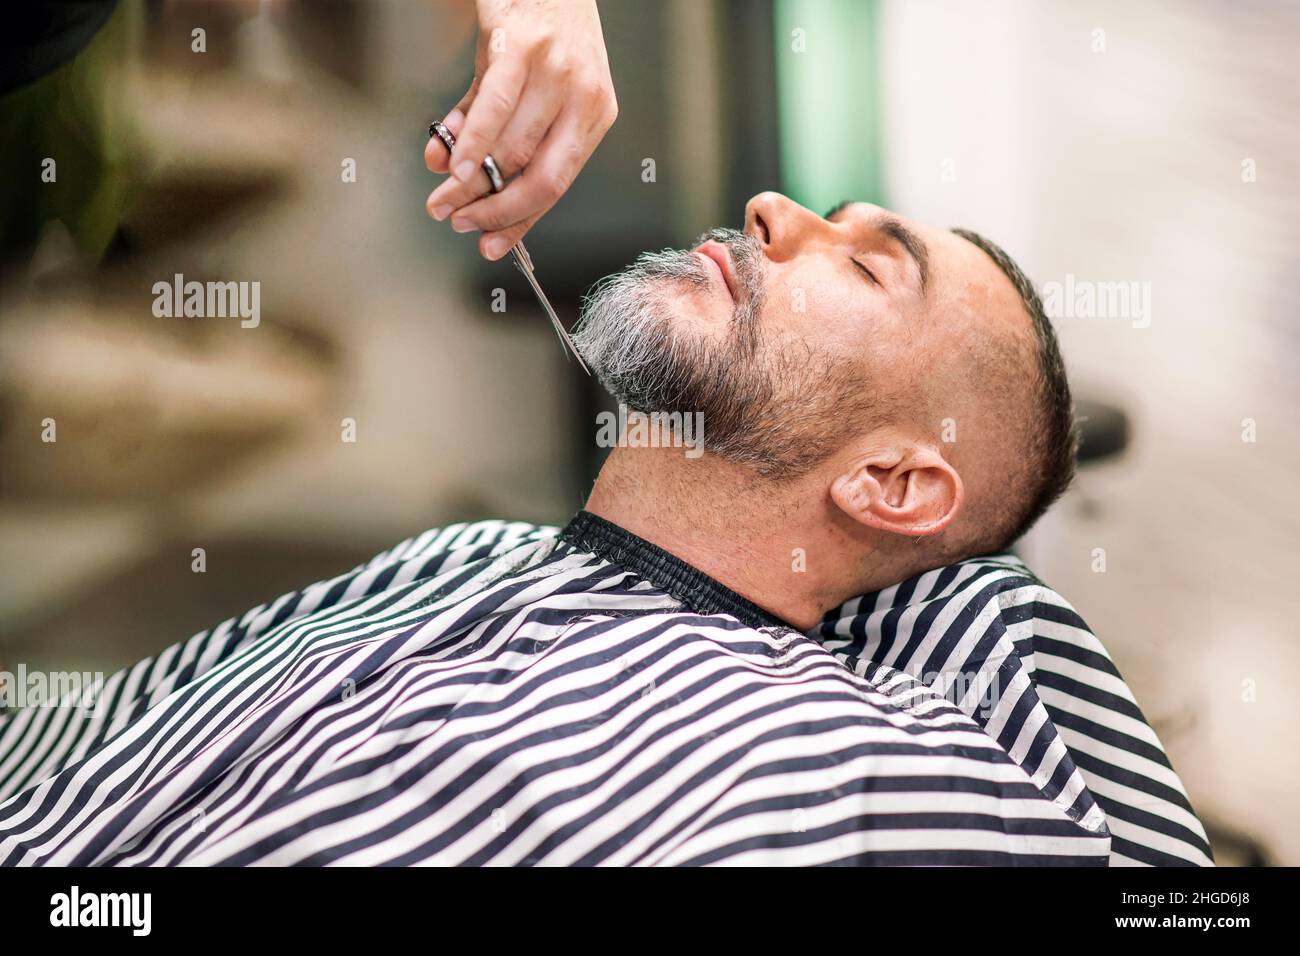 Barber using scissors to trim a middle-aged male clients beard in a professional barbershop or salon in a close up side view on his hand and the custo Stock Photo